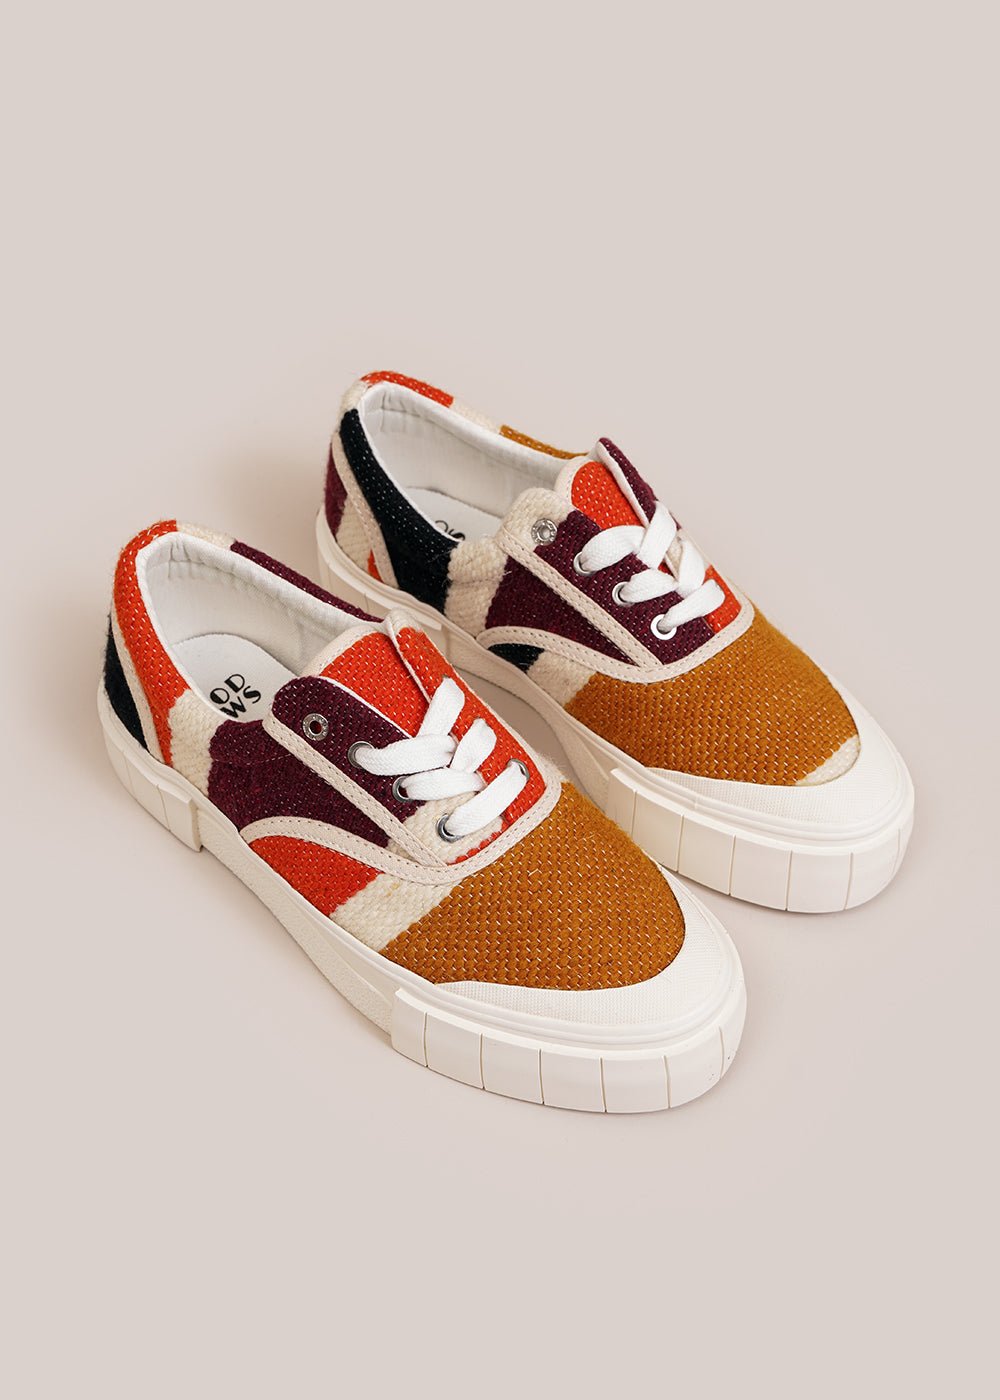 GOOD NEWS Opal Moroccan Sneaker - New Classics Studios Sustainable Ethical Fashion Canada